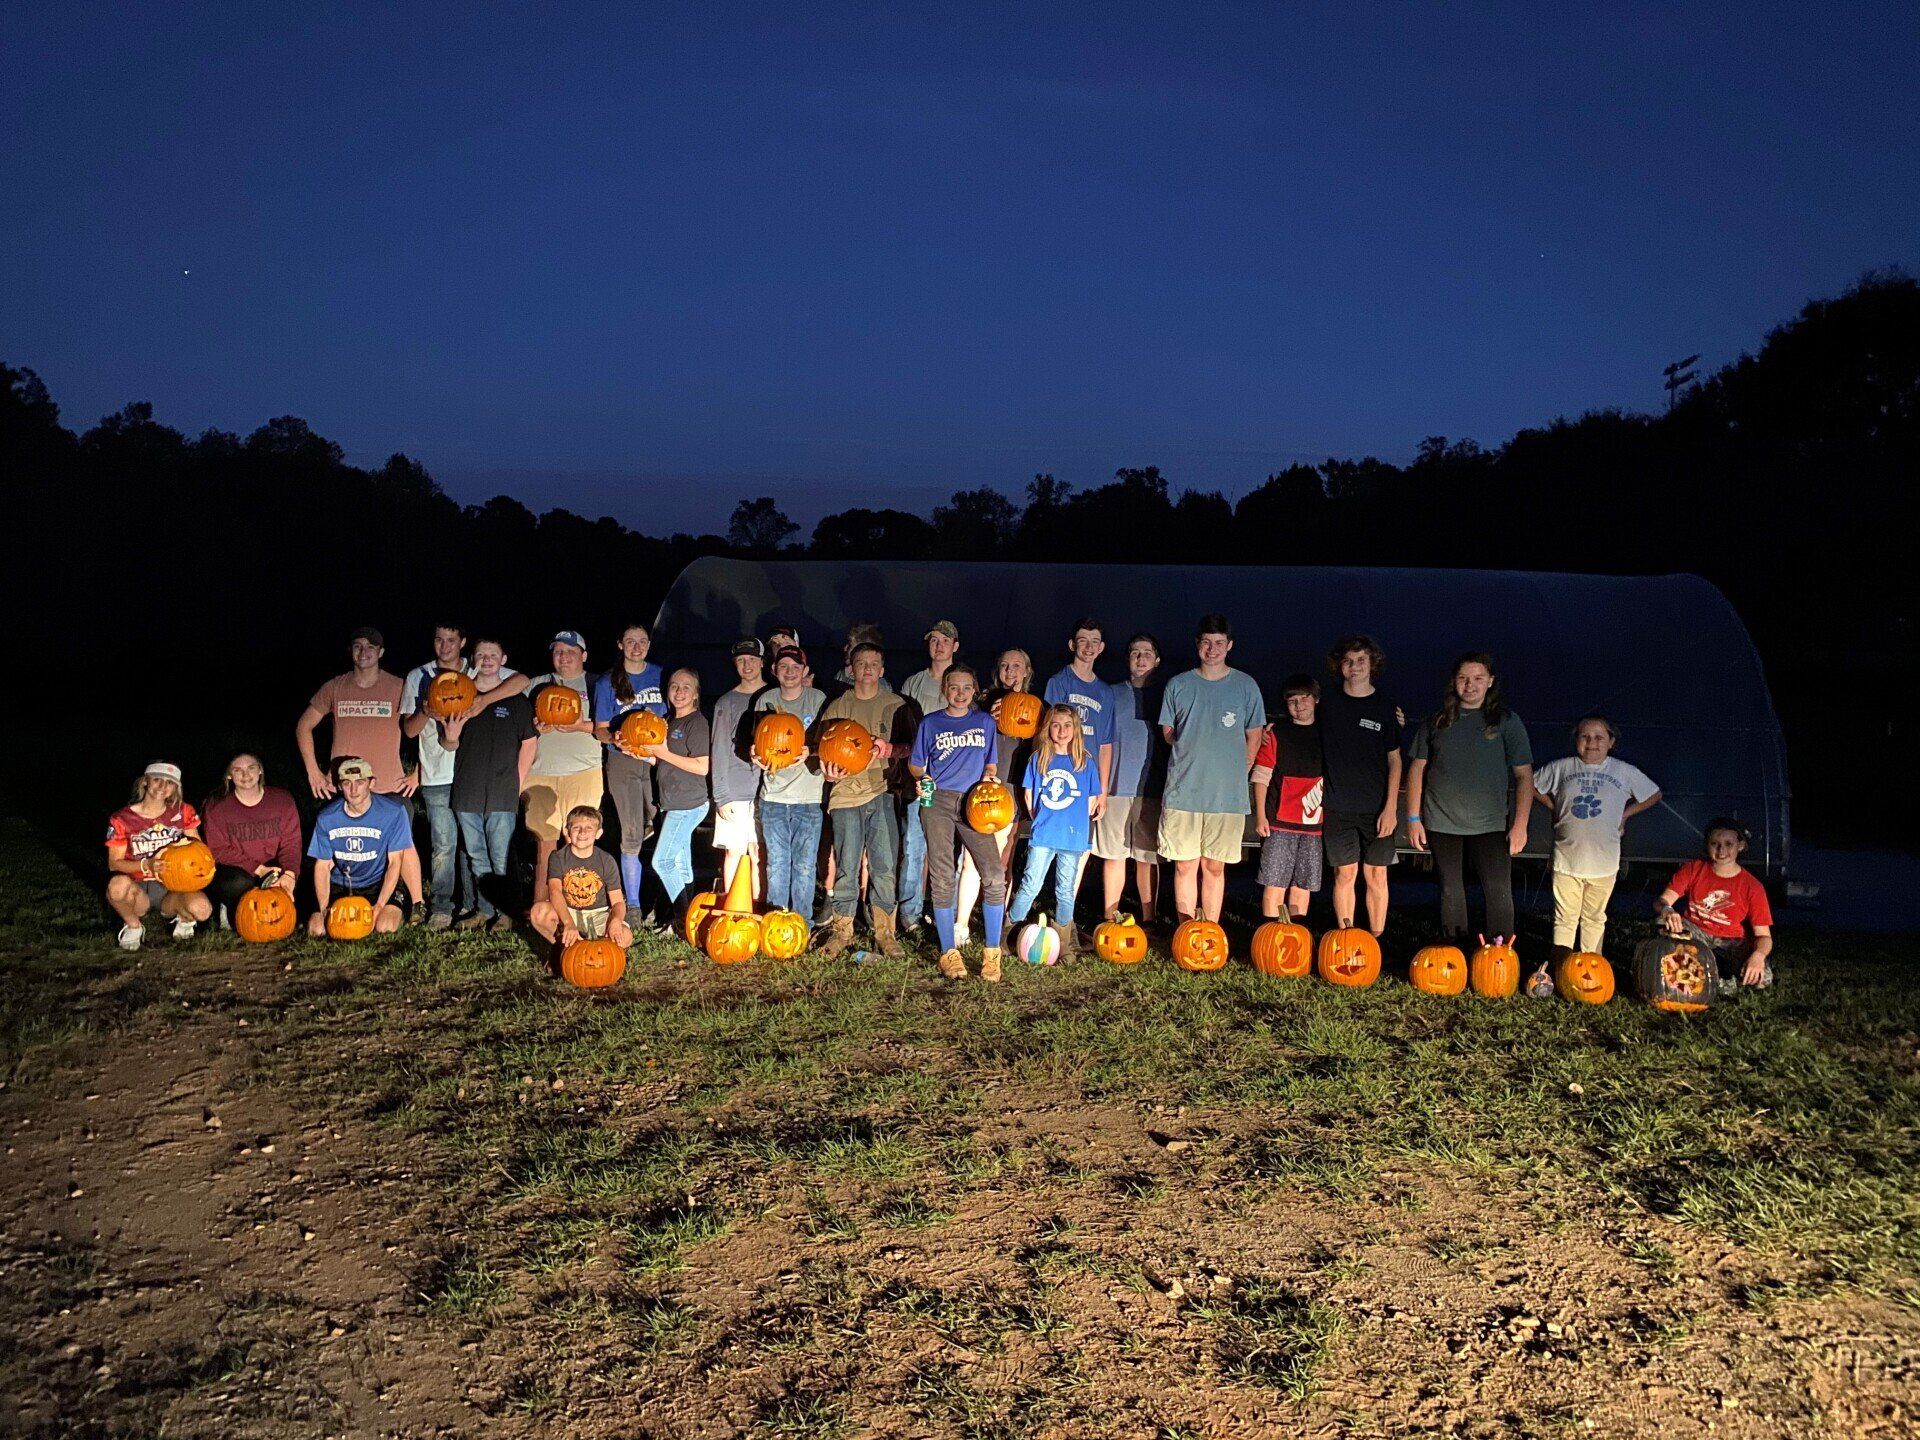 a group of people are posing for a picture in a field of pumpkins .